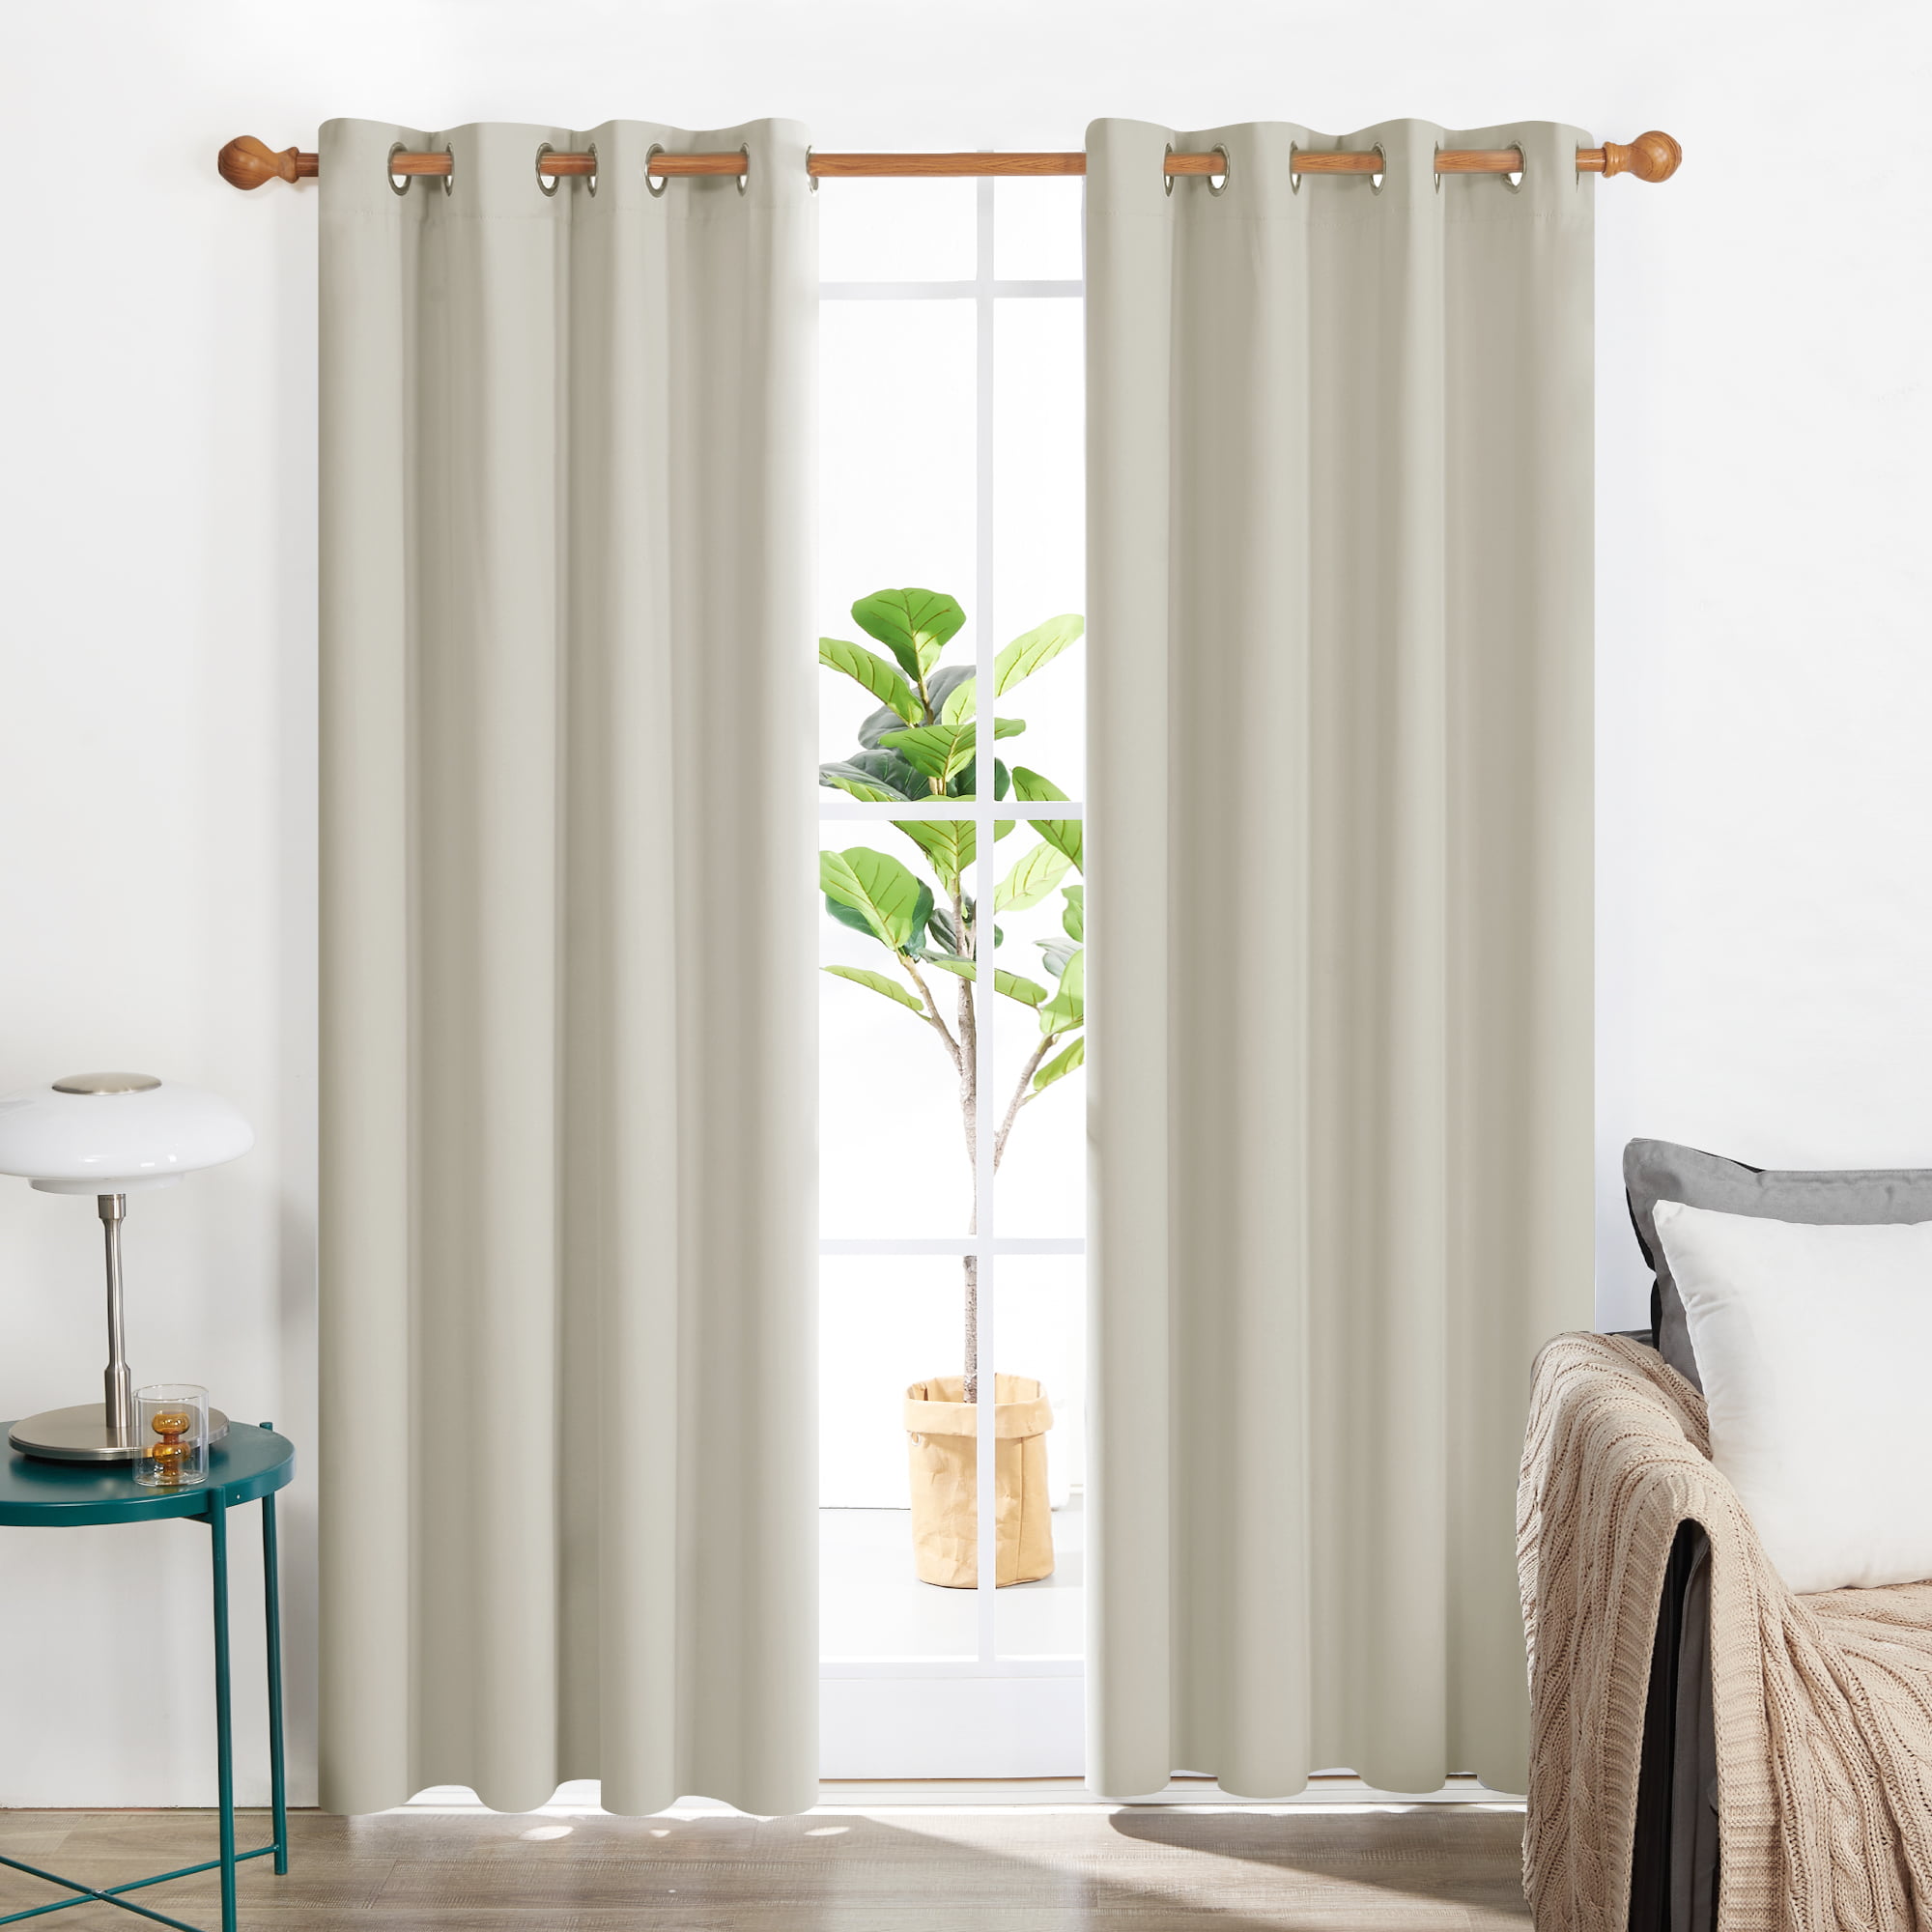 Insulated Cotton Linen Blackout Window Curtains Lace Drape Curtain Bedroom Panel 